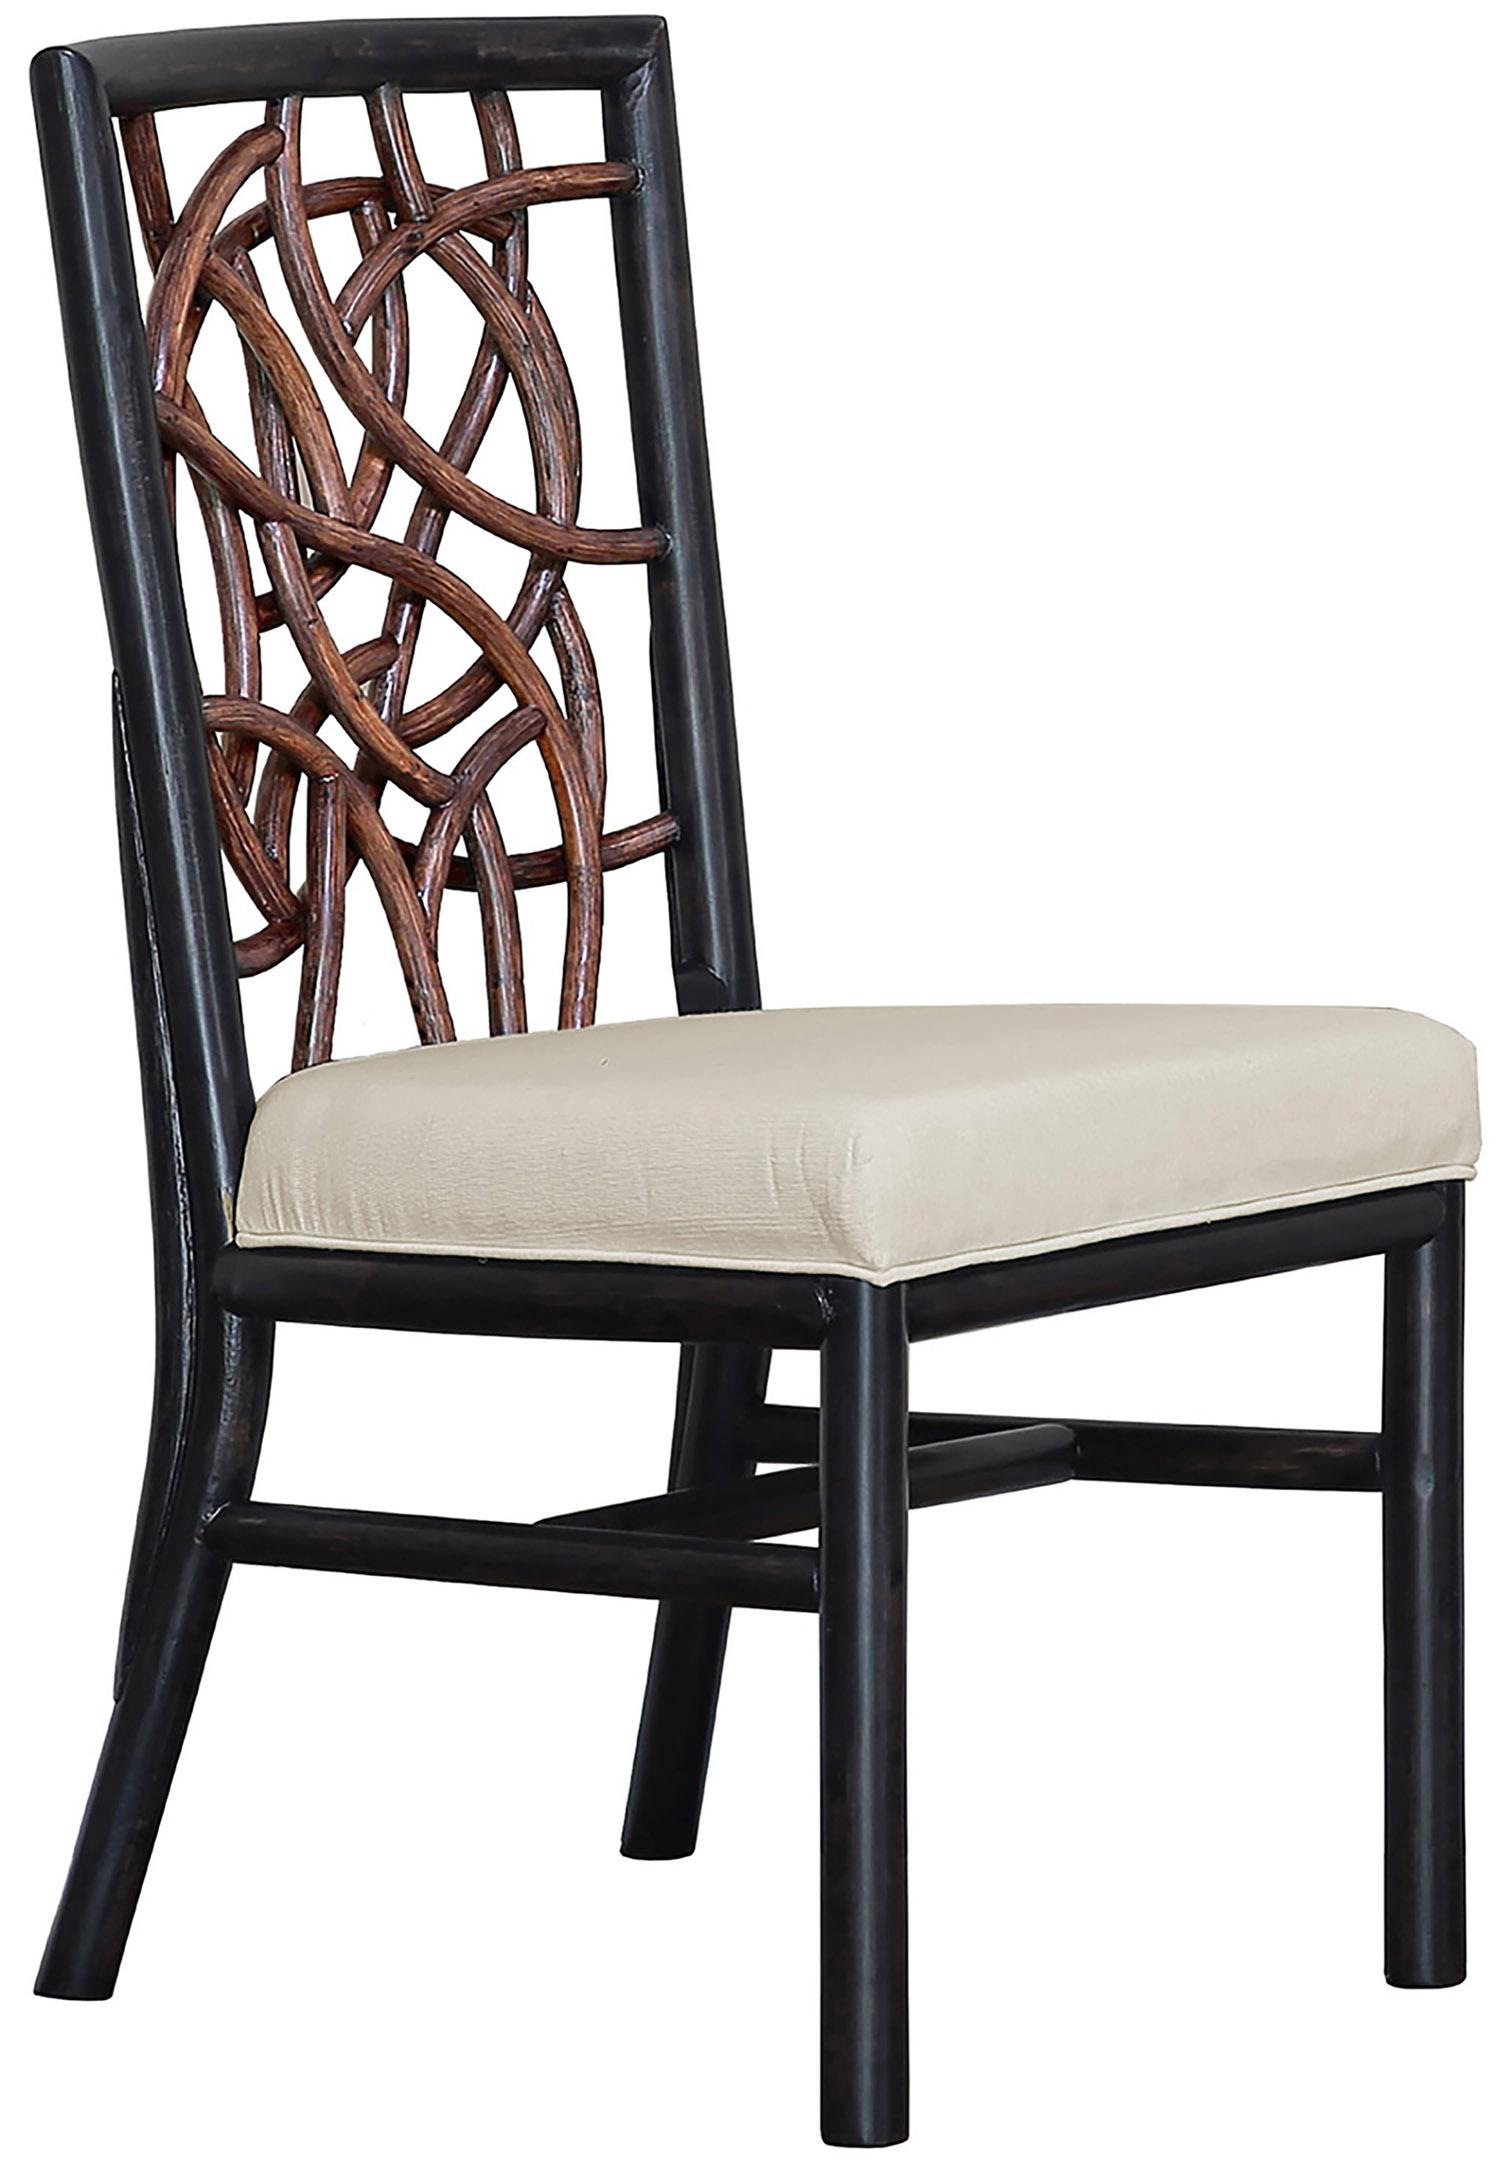 Classic Outdoor Side Chair Trinidad PJS-1401-BLK-SC in Black, Beige Fabric